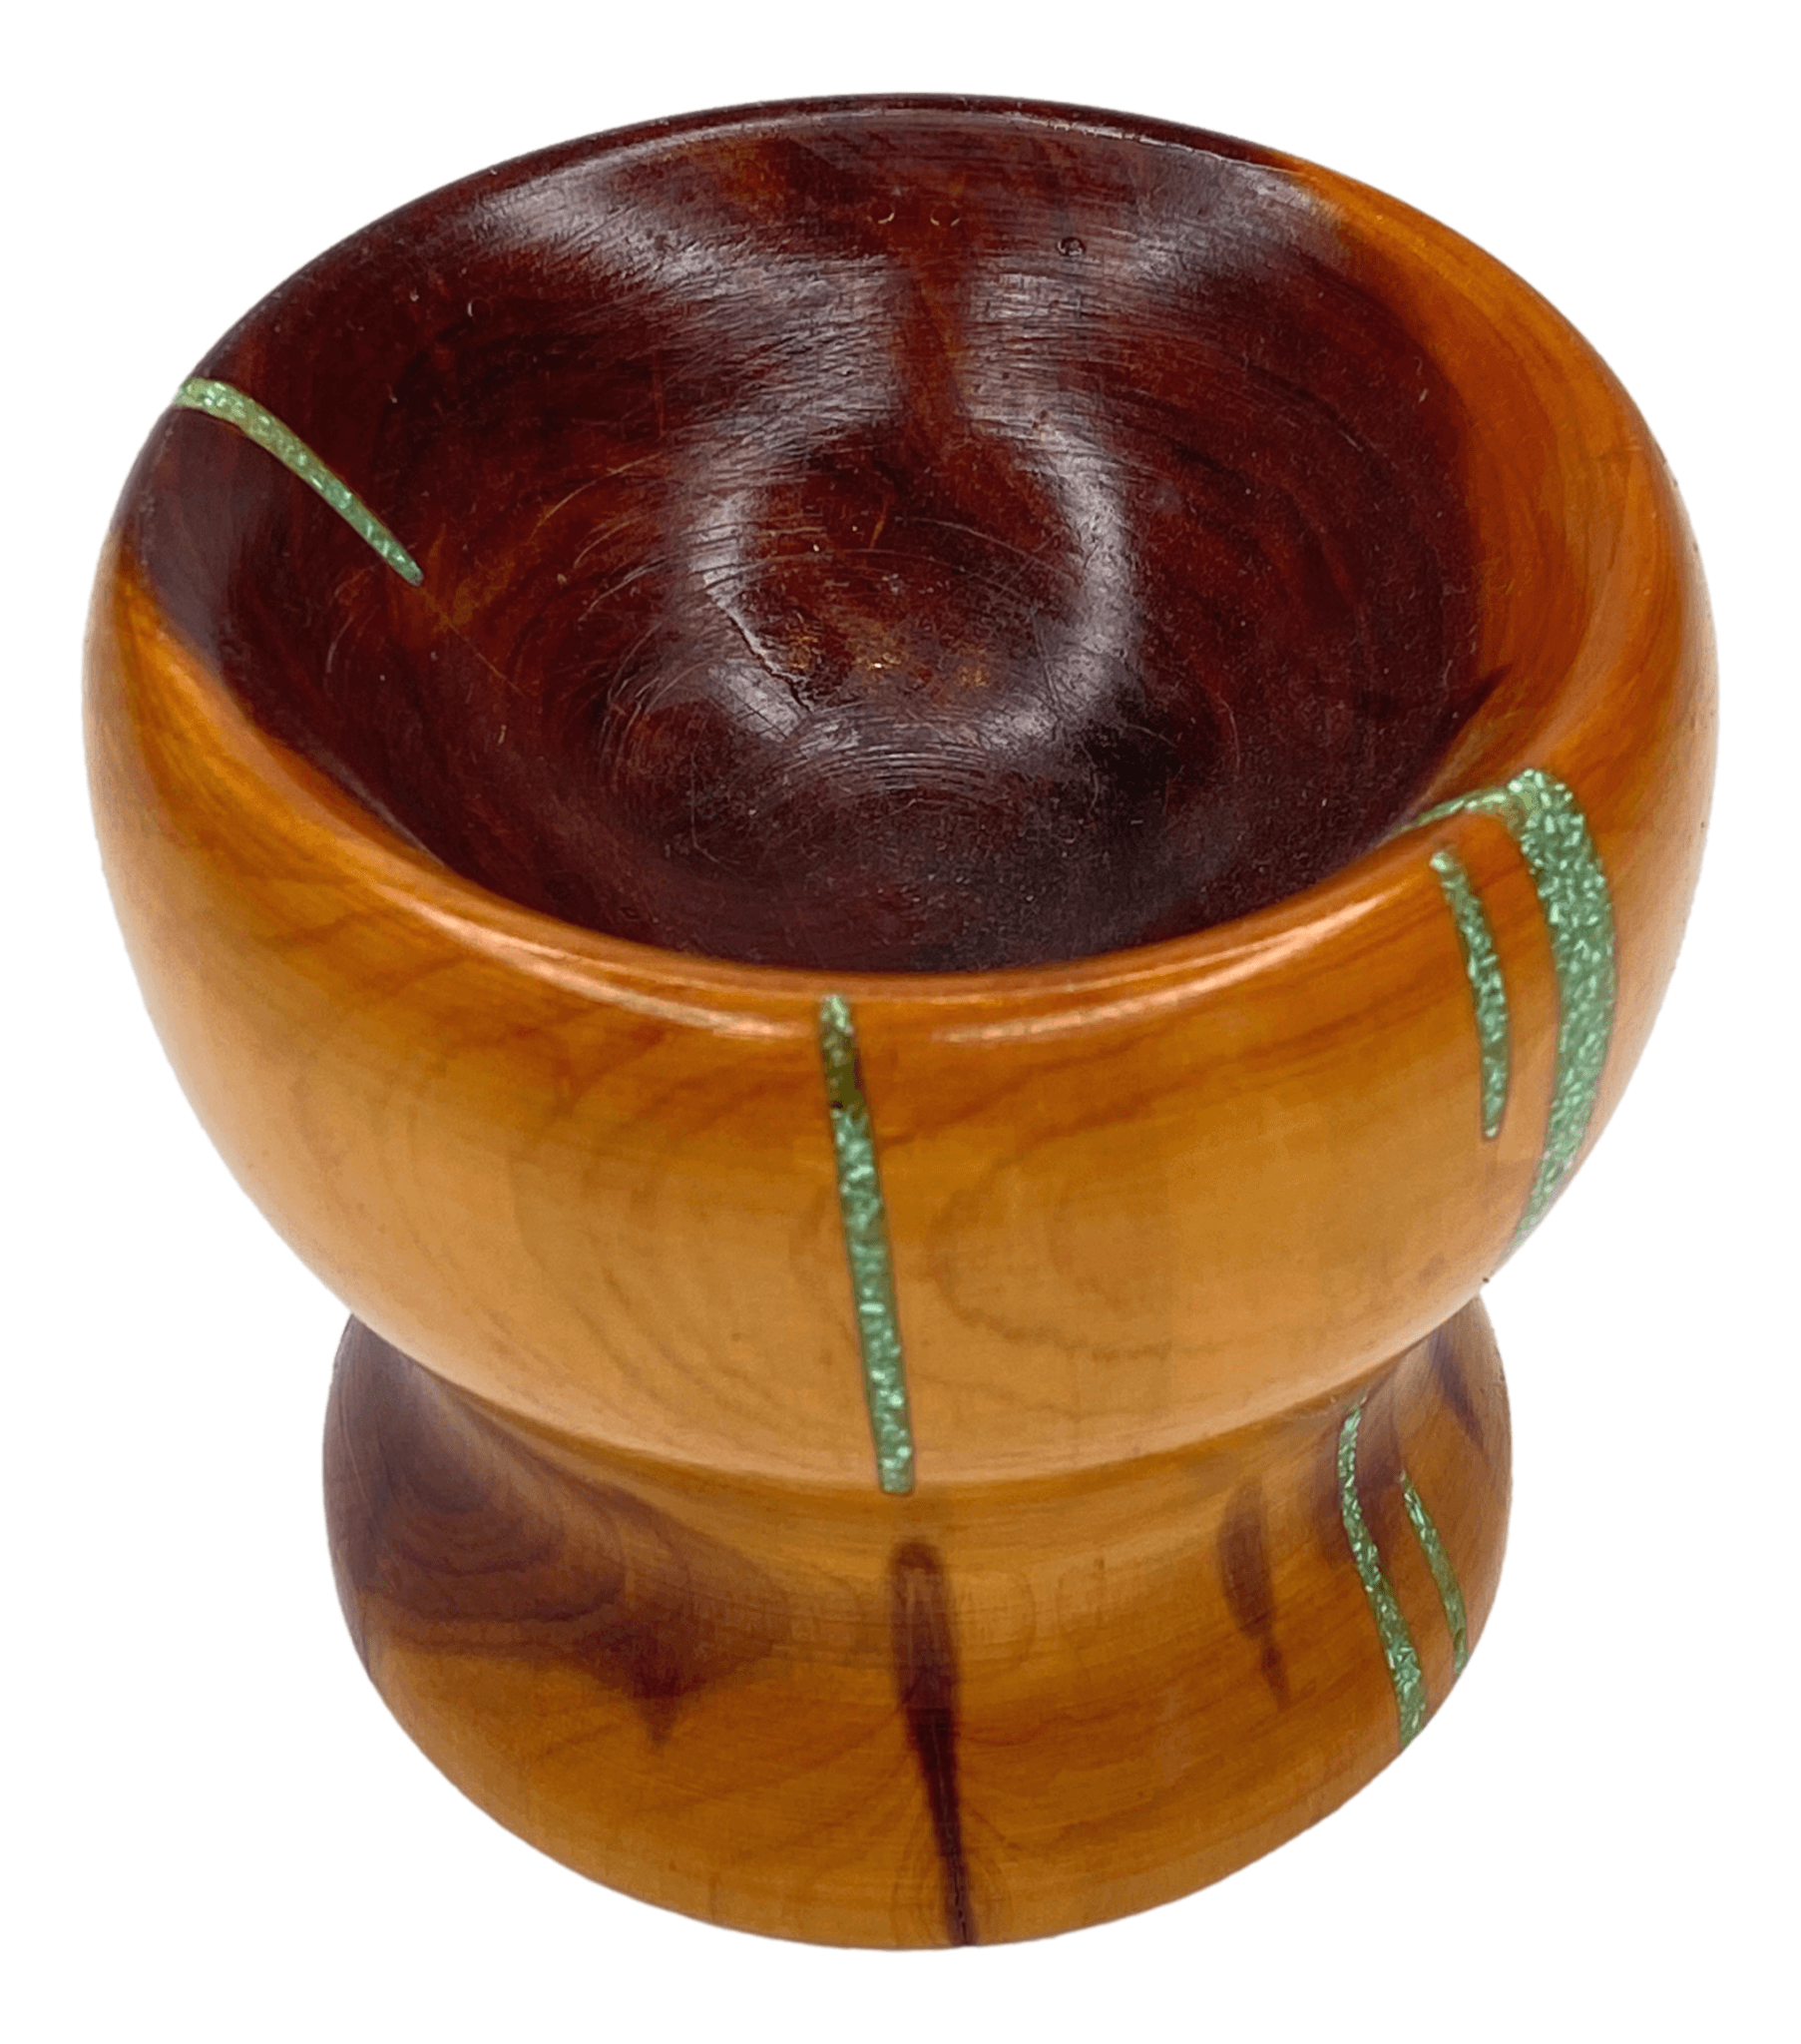 Bowl Mesquite Wood Turquoise Inlay Handcrafted by Skilled Artisan 3 1/2 W x 3 H x 1 1/2 D Inches - Ysleta Mission Gift Shop- VOTED El Paso's Best Gift Shop